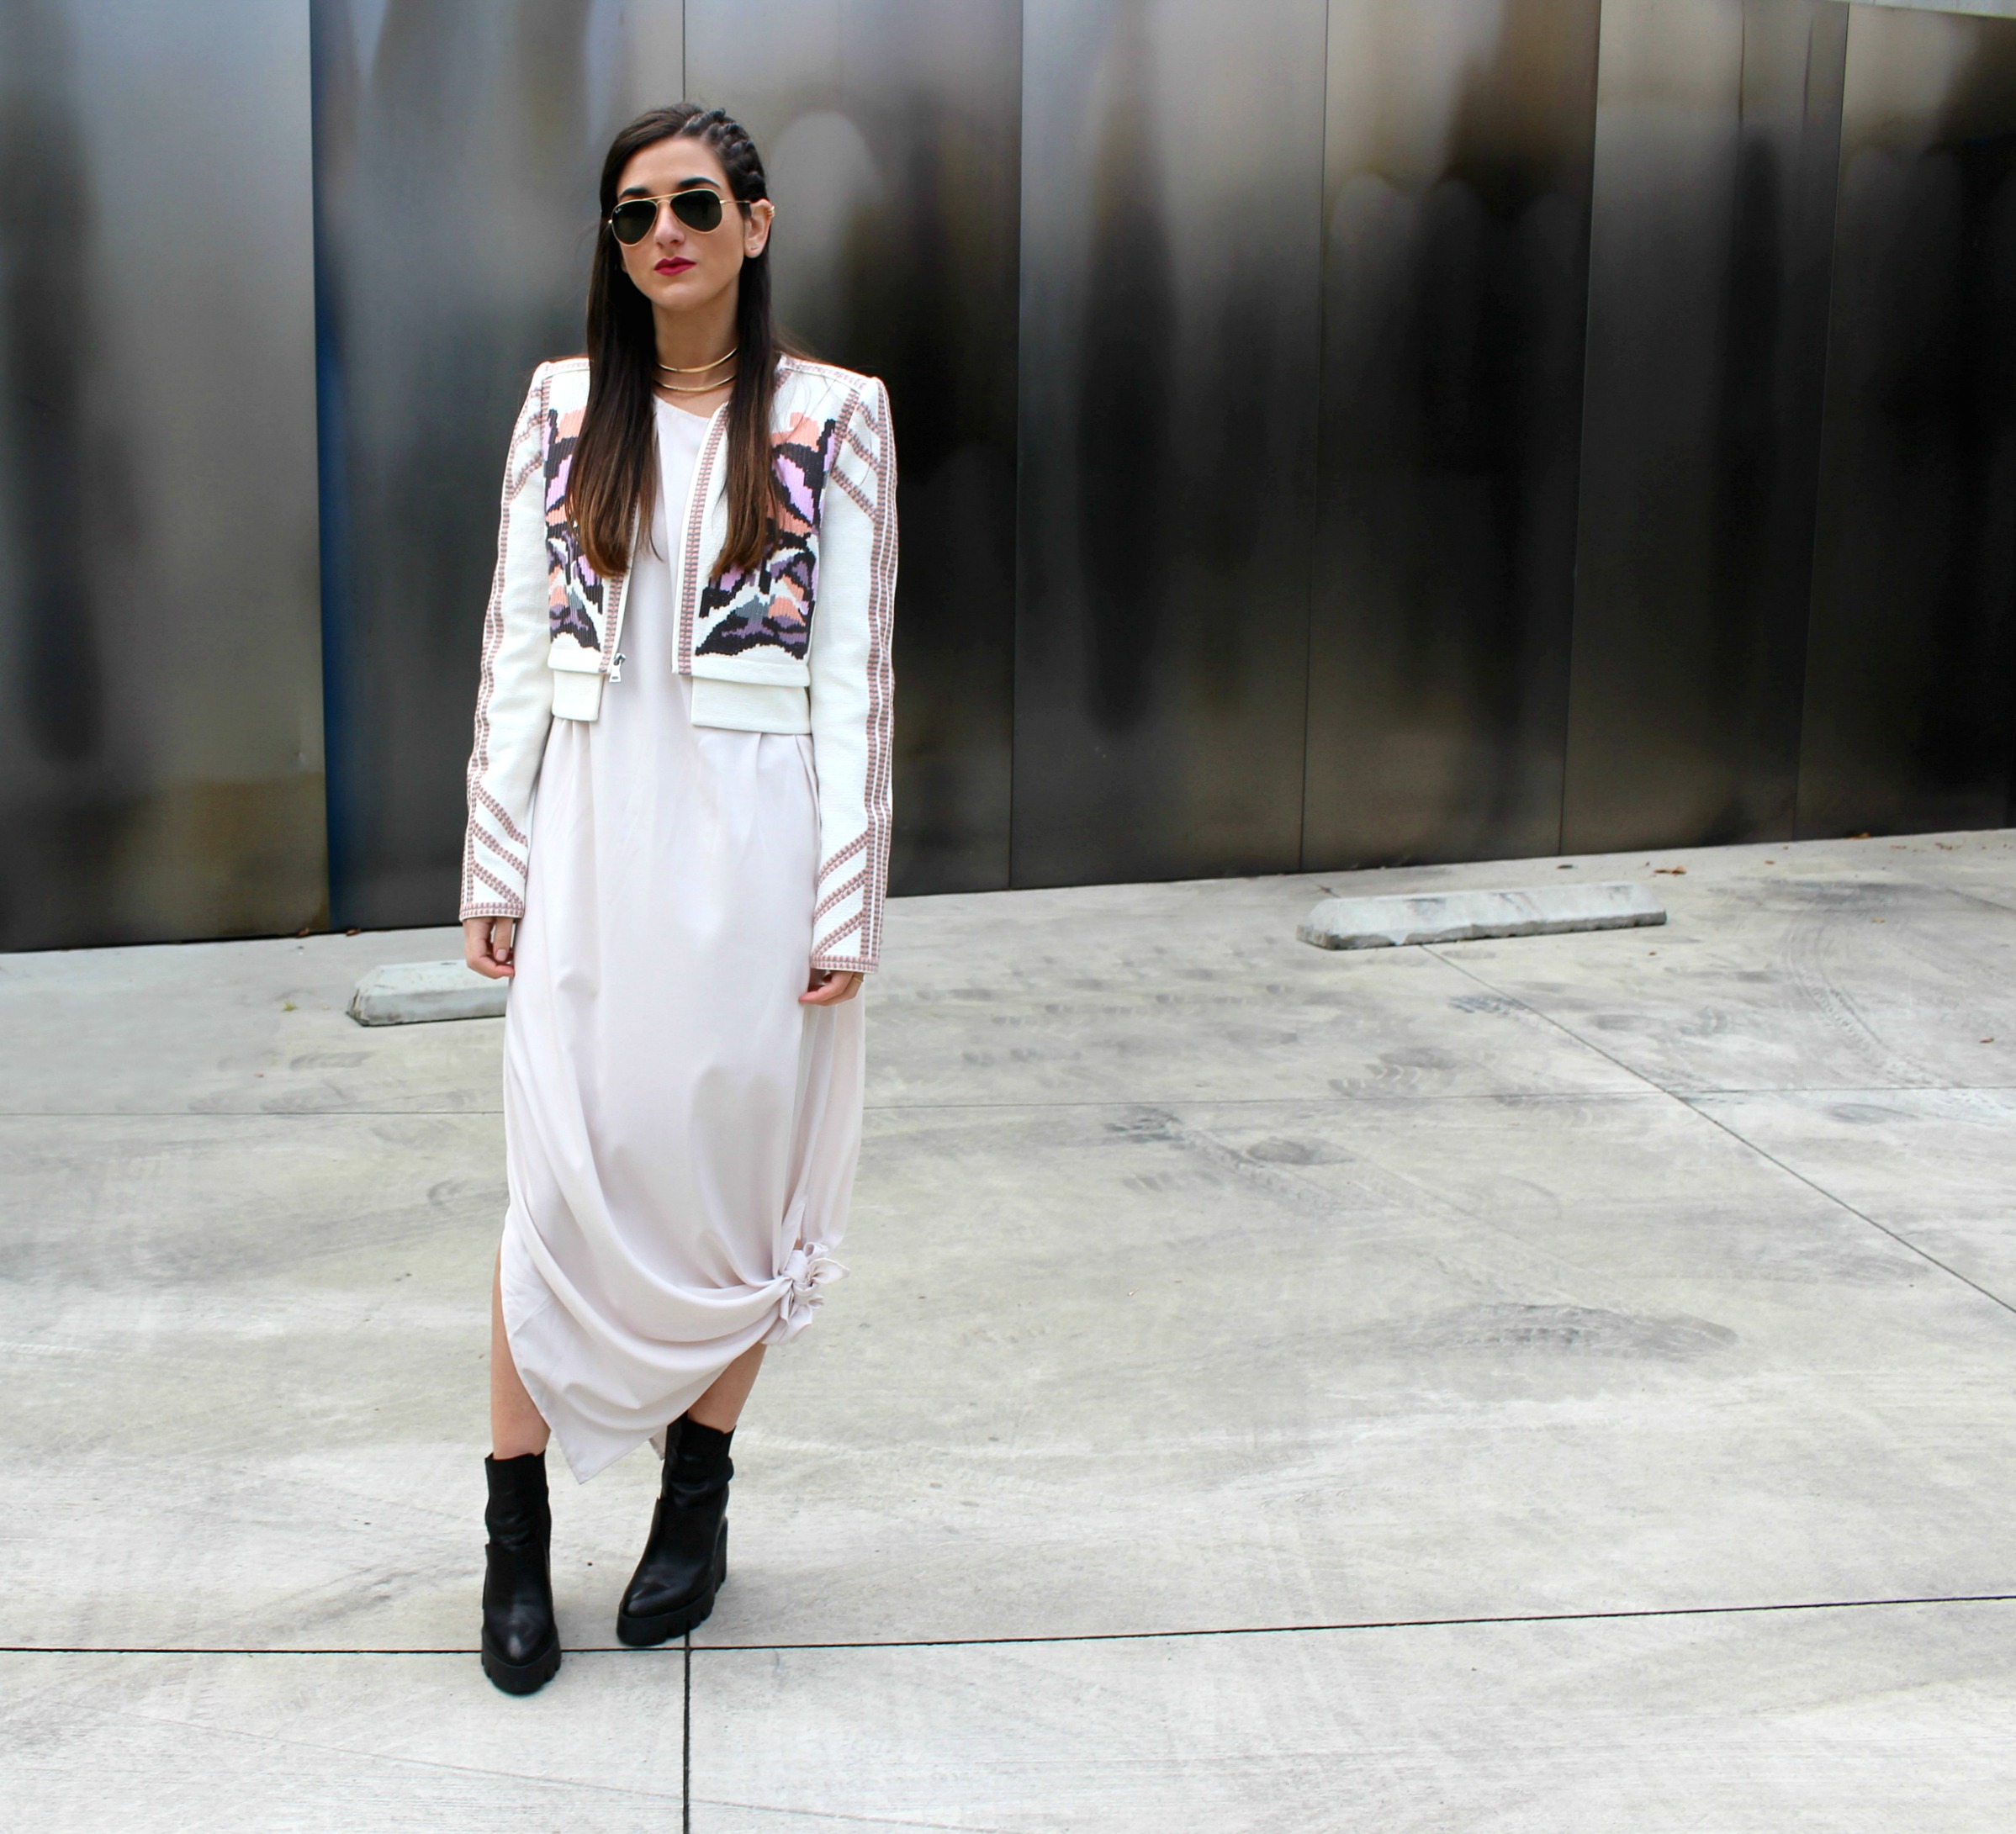 Knotted Maxi Dress Zehava Harel Louboutins & Love Fashion Blog Esther Santer NYC Street Style Blogger Blush Pink Modest Outfit OOTD BCBG Jacket Ash Booties Gold Collar Necklace RayBan Aviator Sunglasses Hair Model Wear Inspo Accessories Model Women.jpg